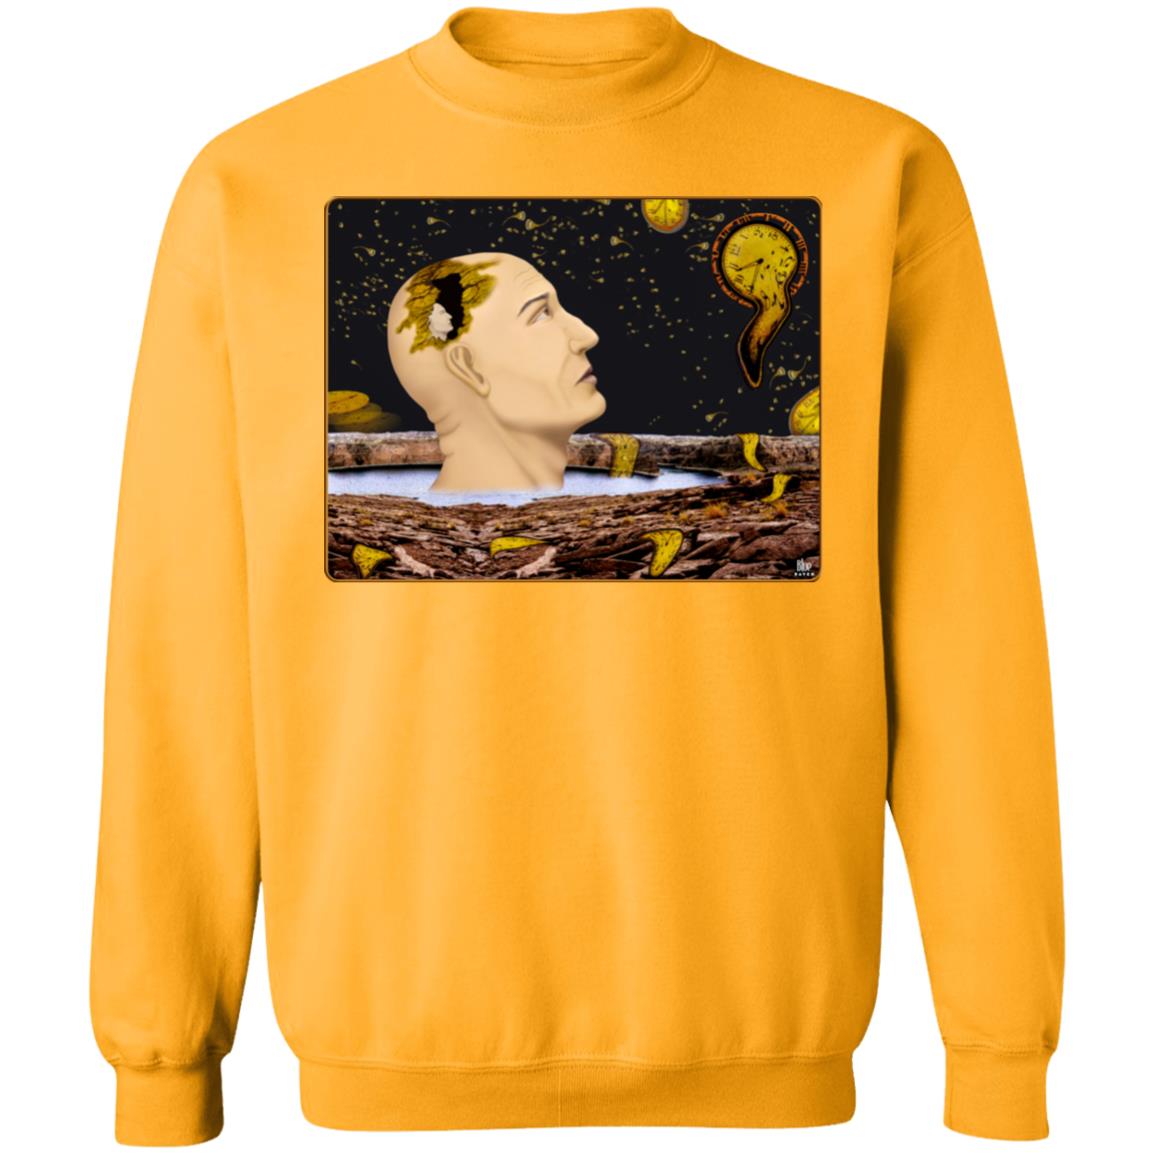 Earth Time Running Out - Unisex Crew Neck Sweatshirt